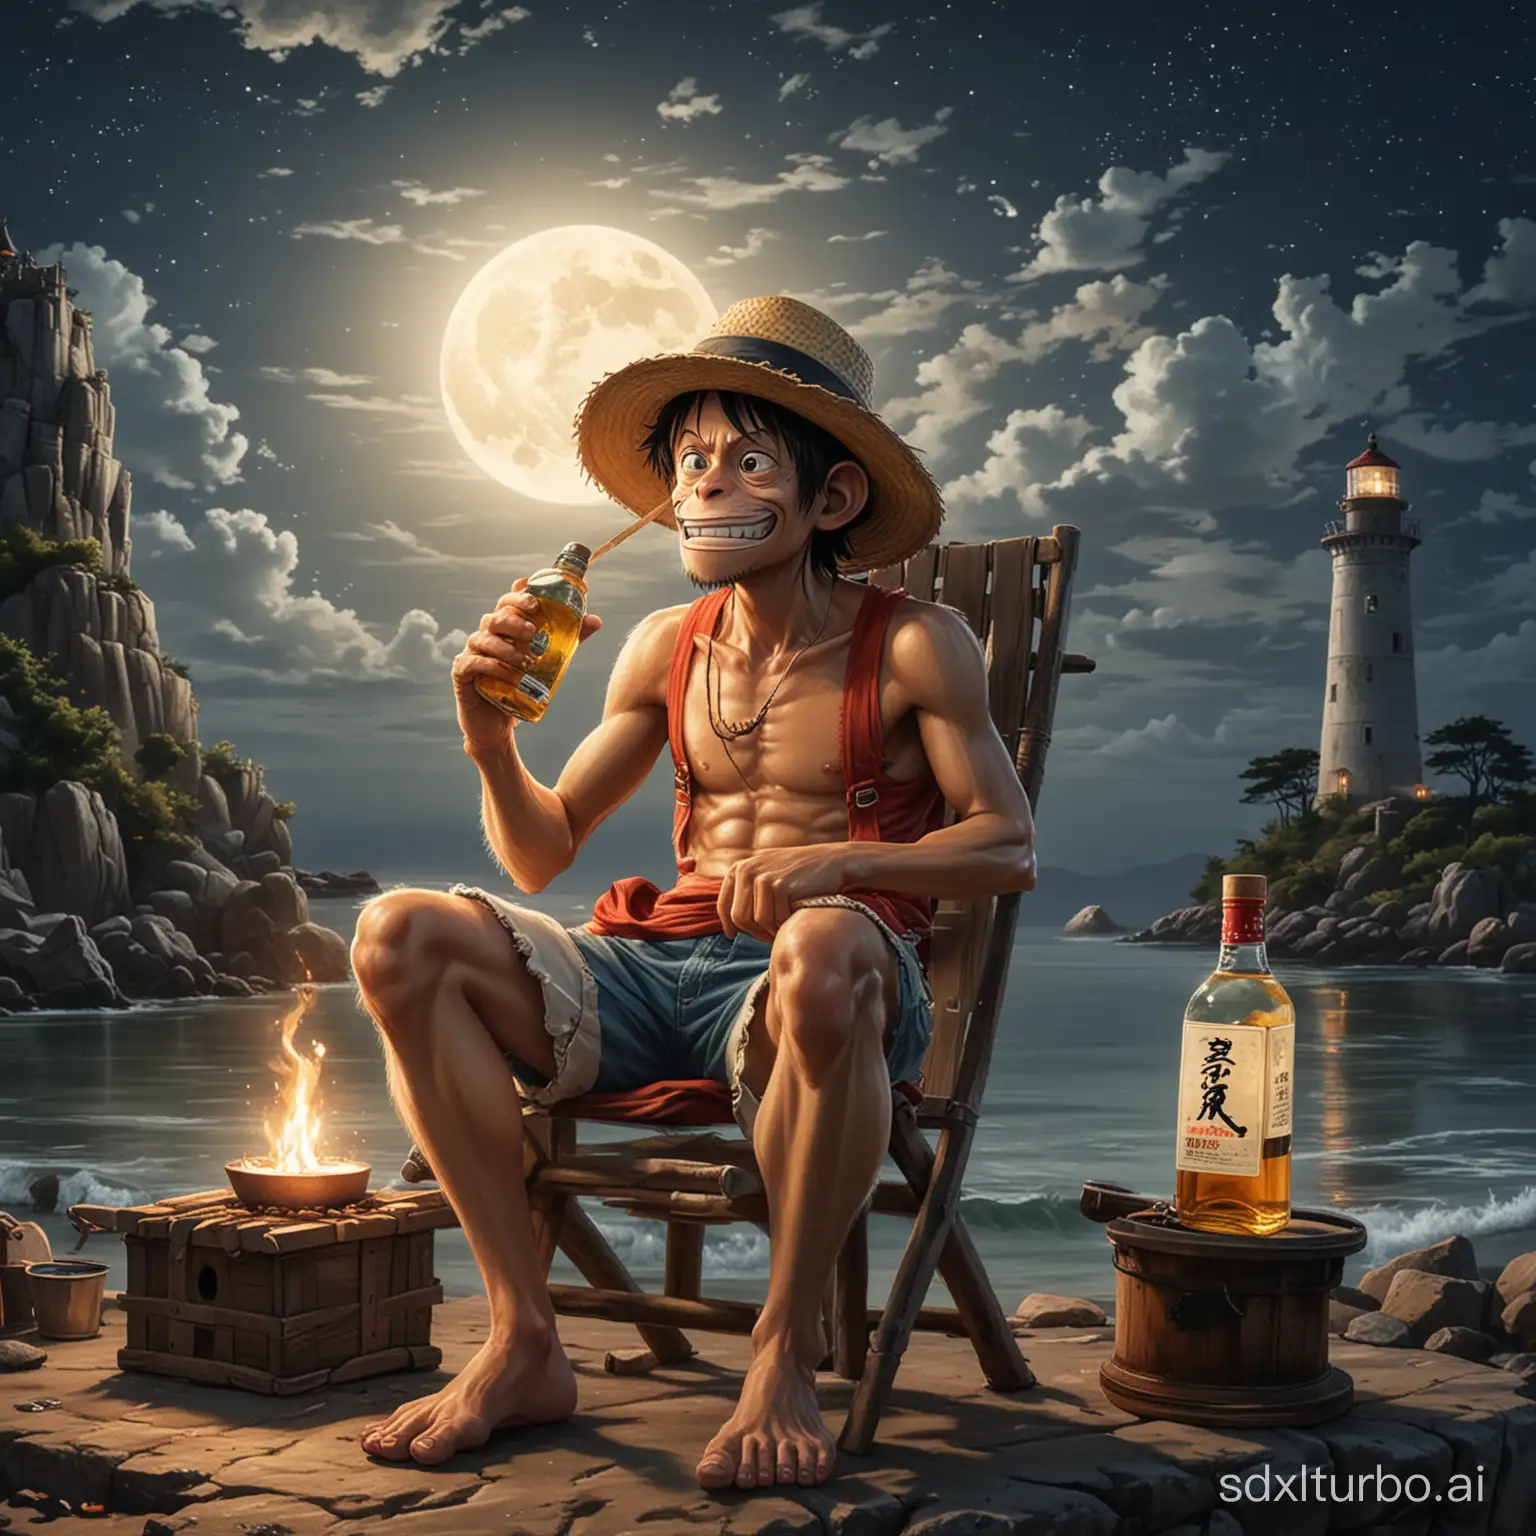 Luffy-Sitting-by-the-Ancient-Lighthouse-Grilling-Fish-and-Enjoying-Soju-under-the-Full-Moon